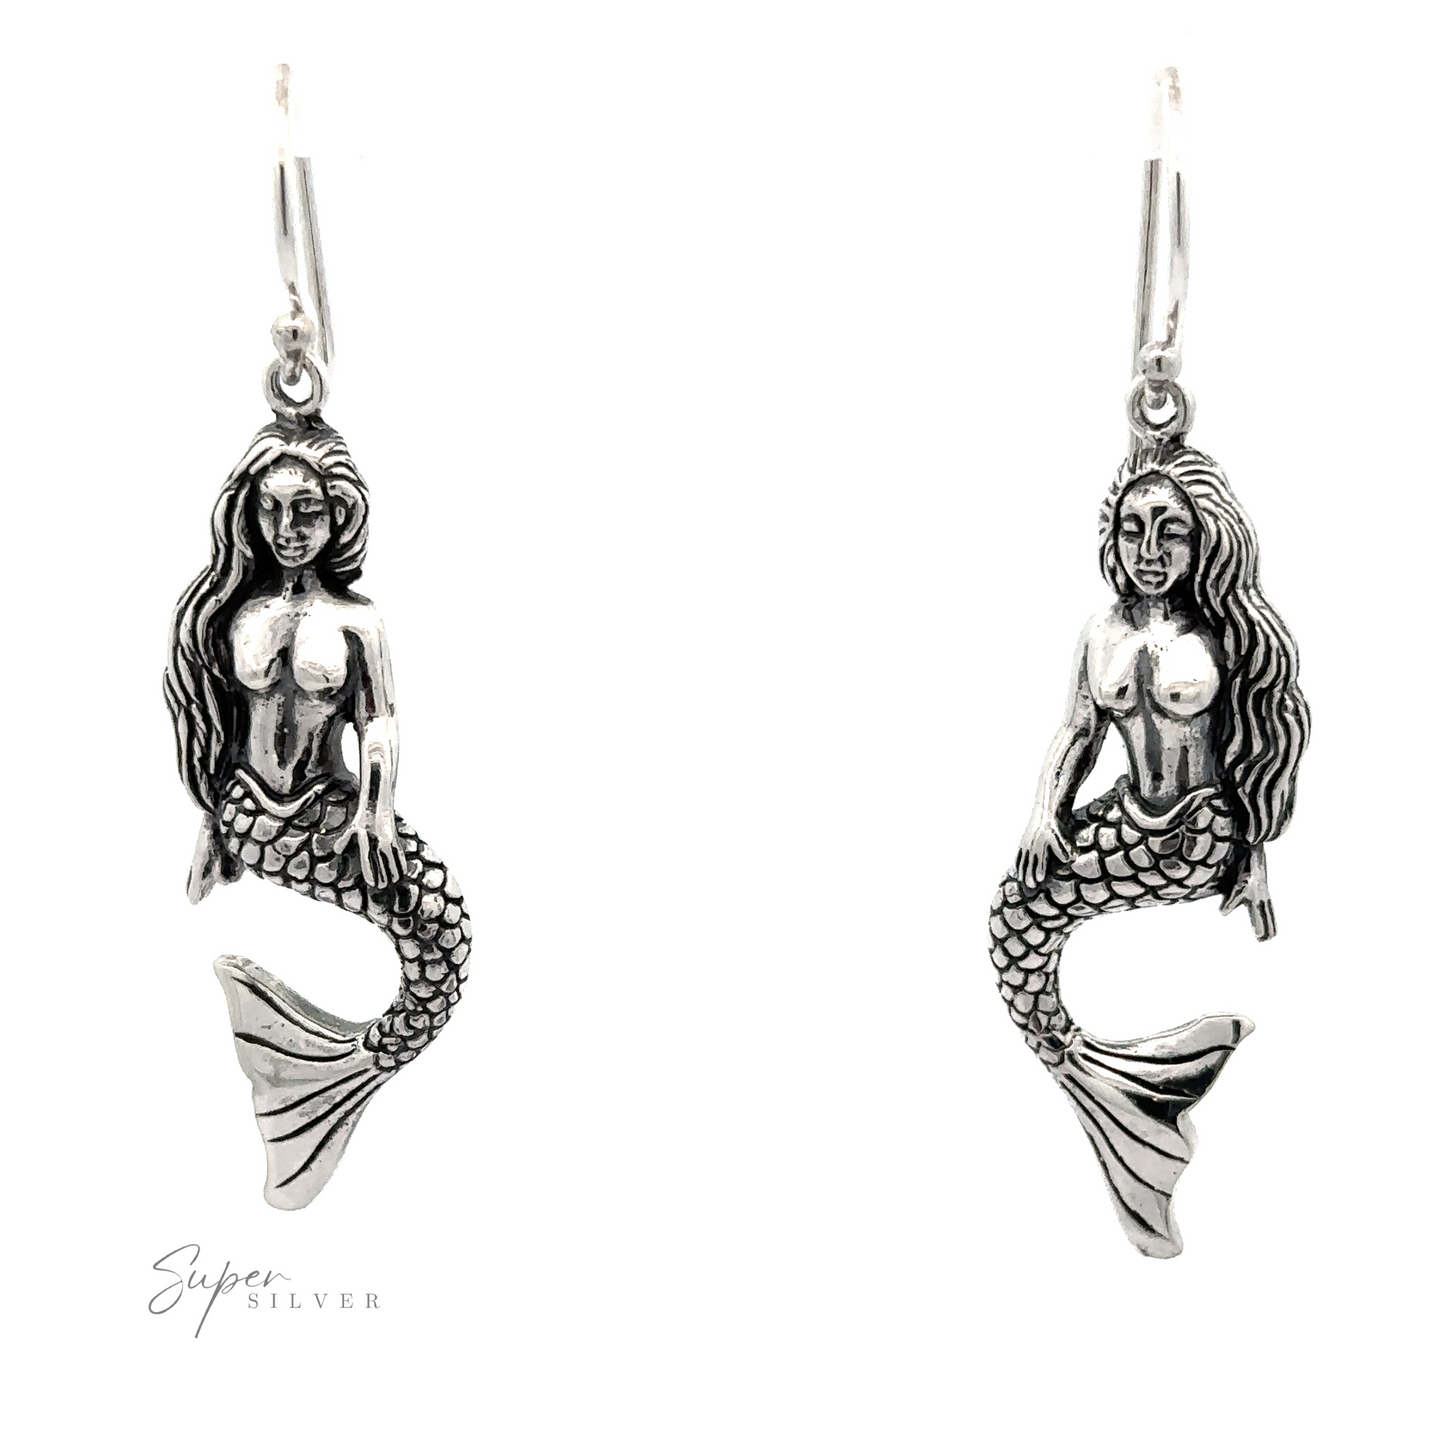 Pair of sitting mermaid earrings with detailed design, hanging from hooks, displayed against a white background.